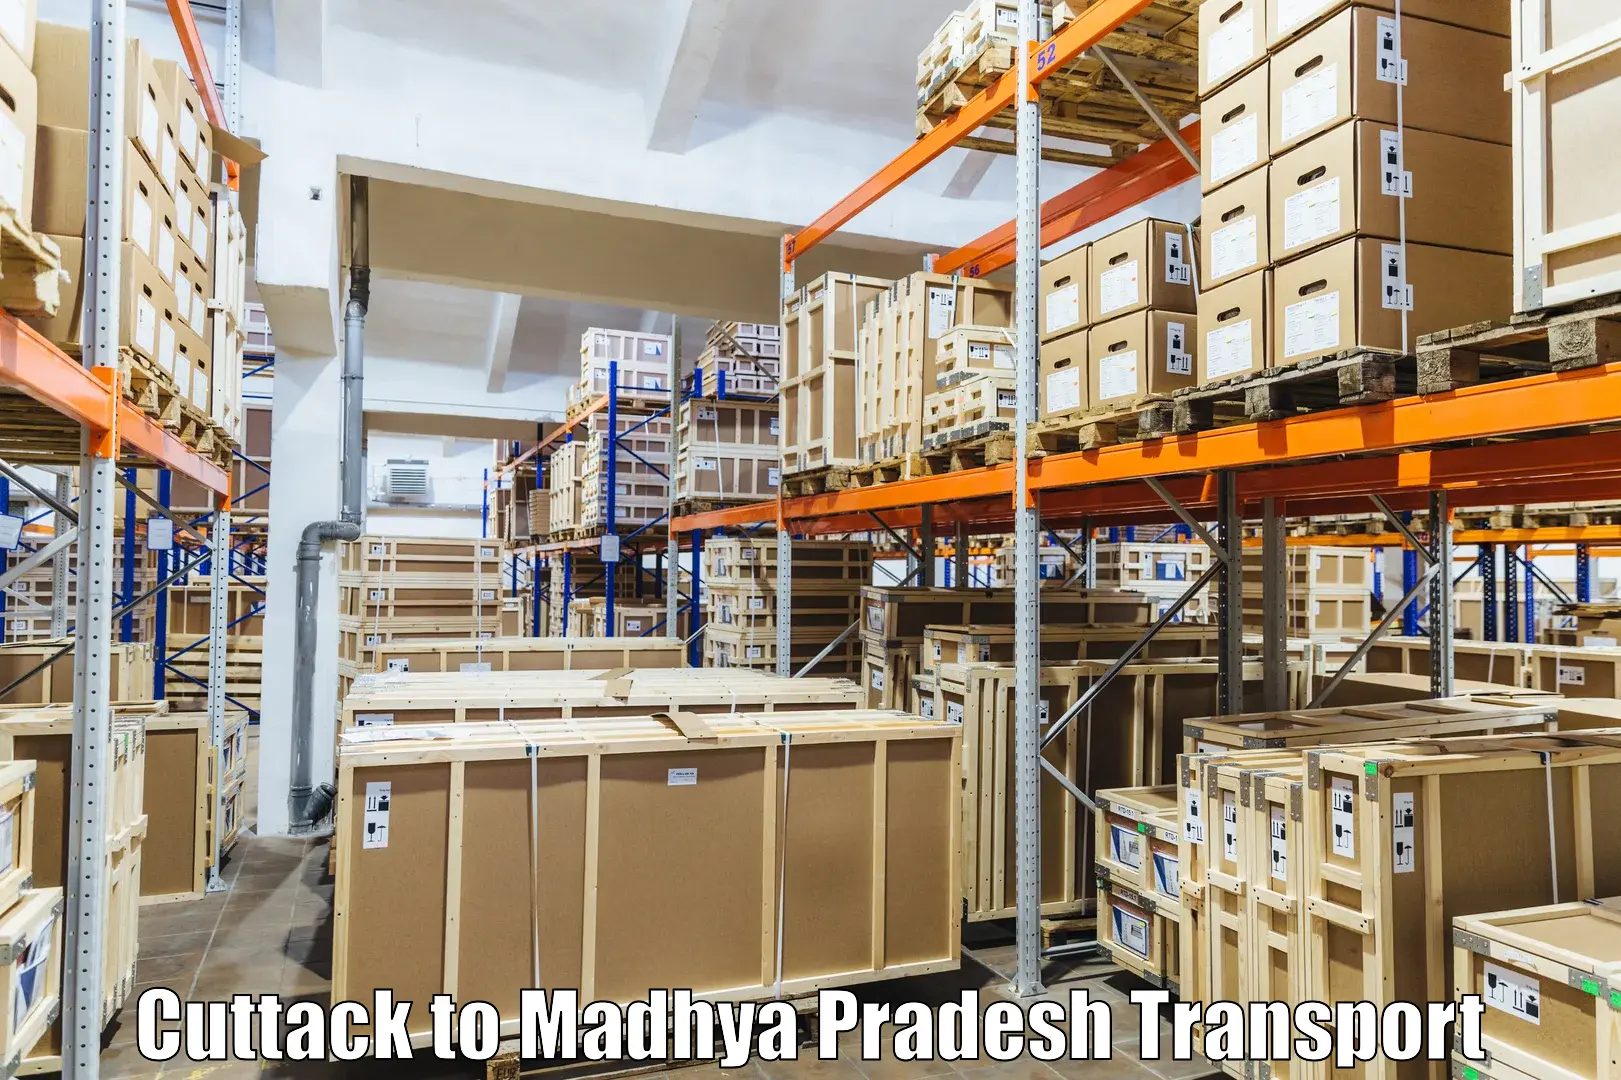 Container transport service Cuttack to Prithvipur